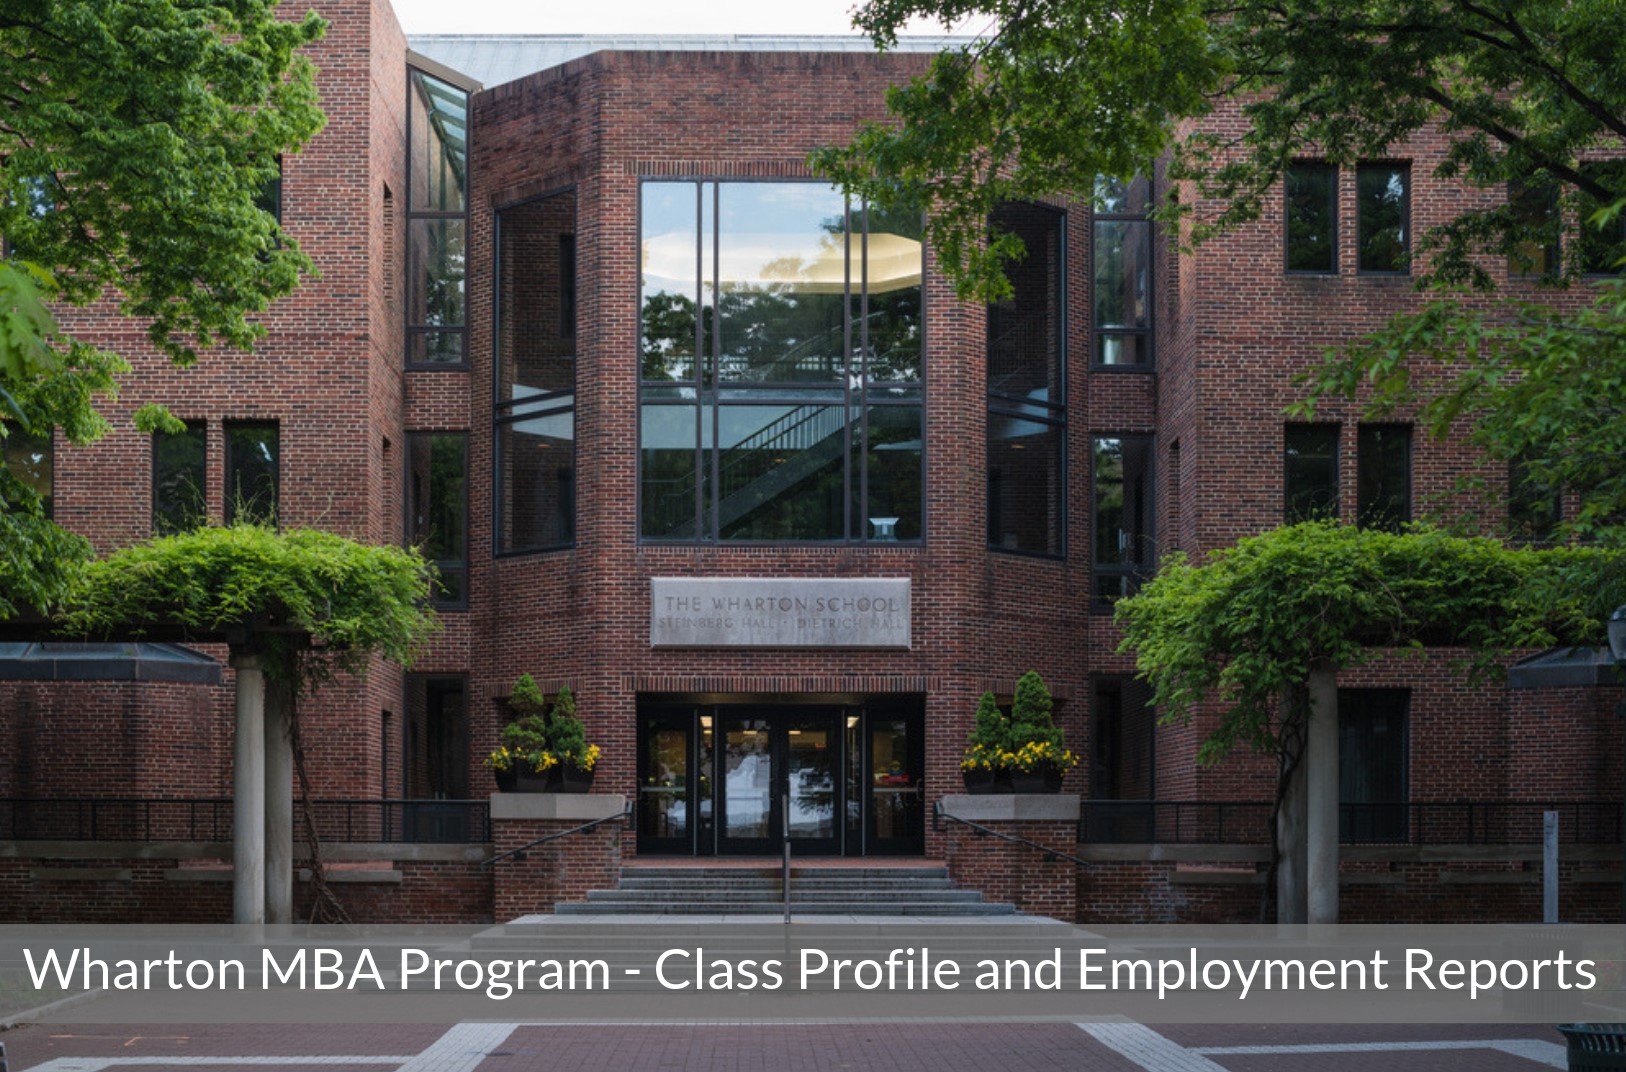 Wharton Business School MBA Program - Class Profile, Career and Employment Outcomes